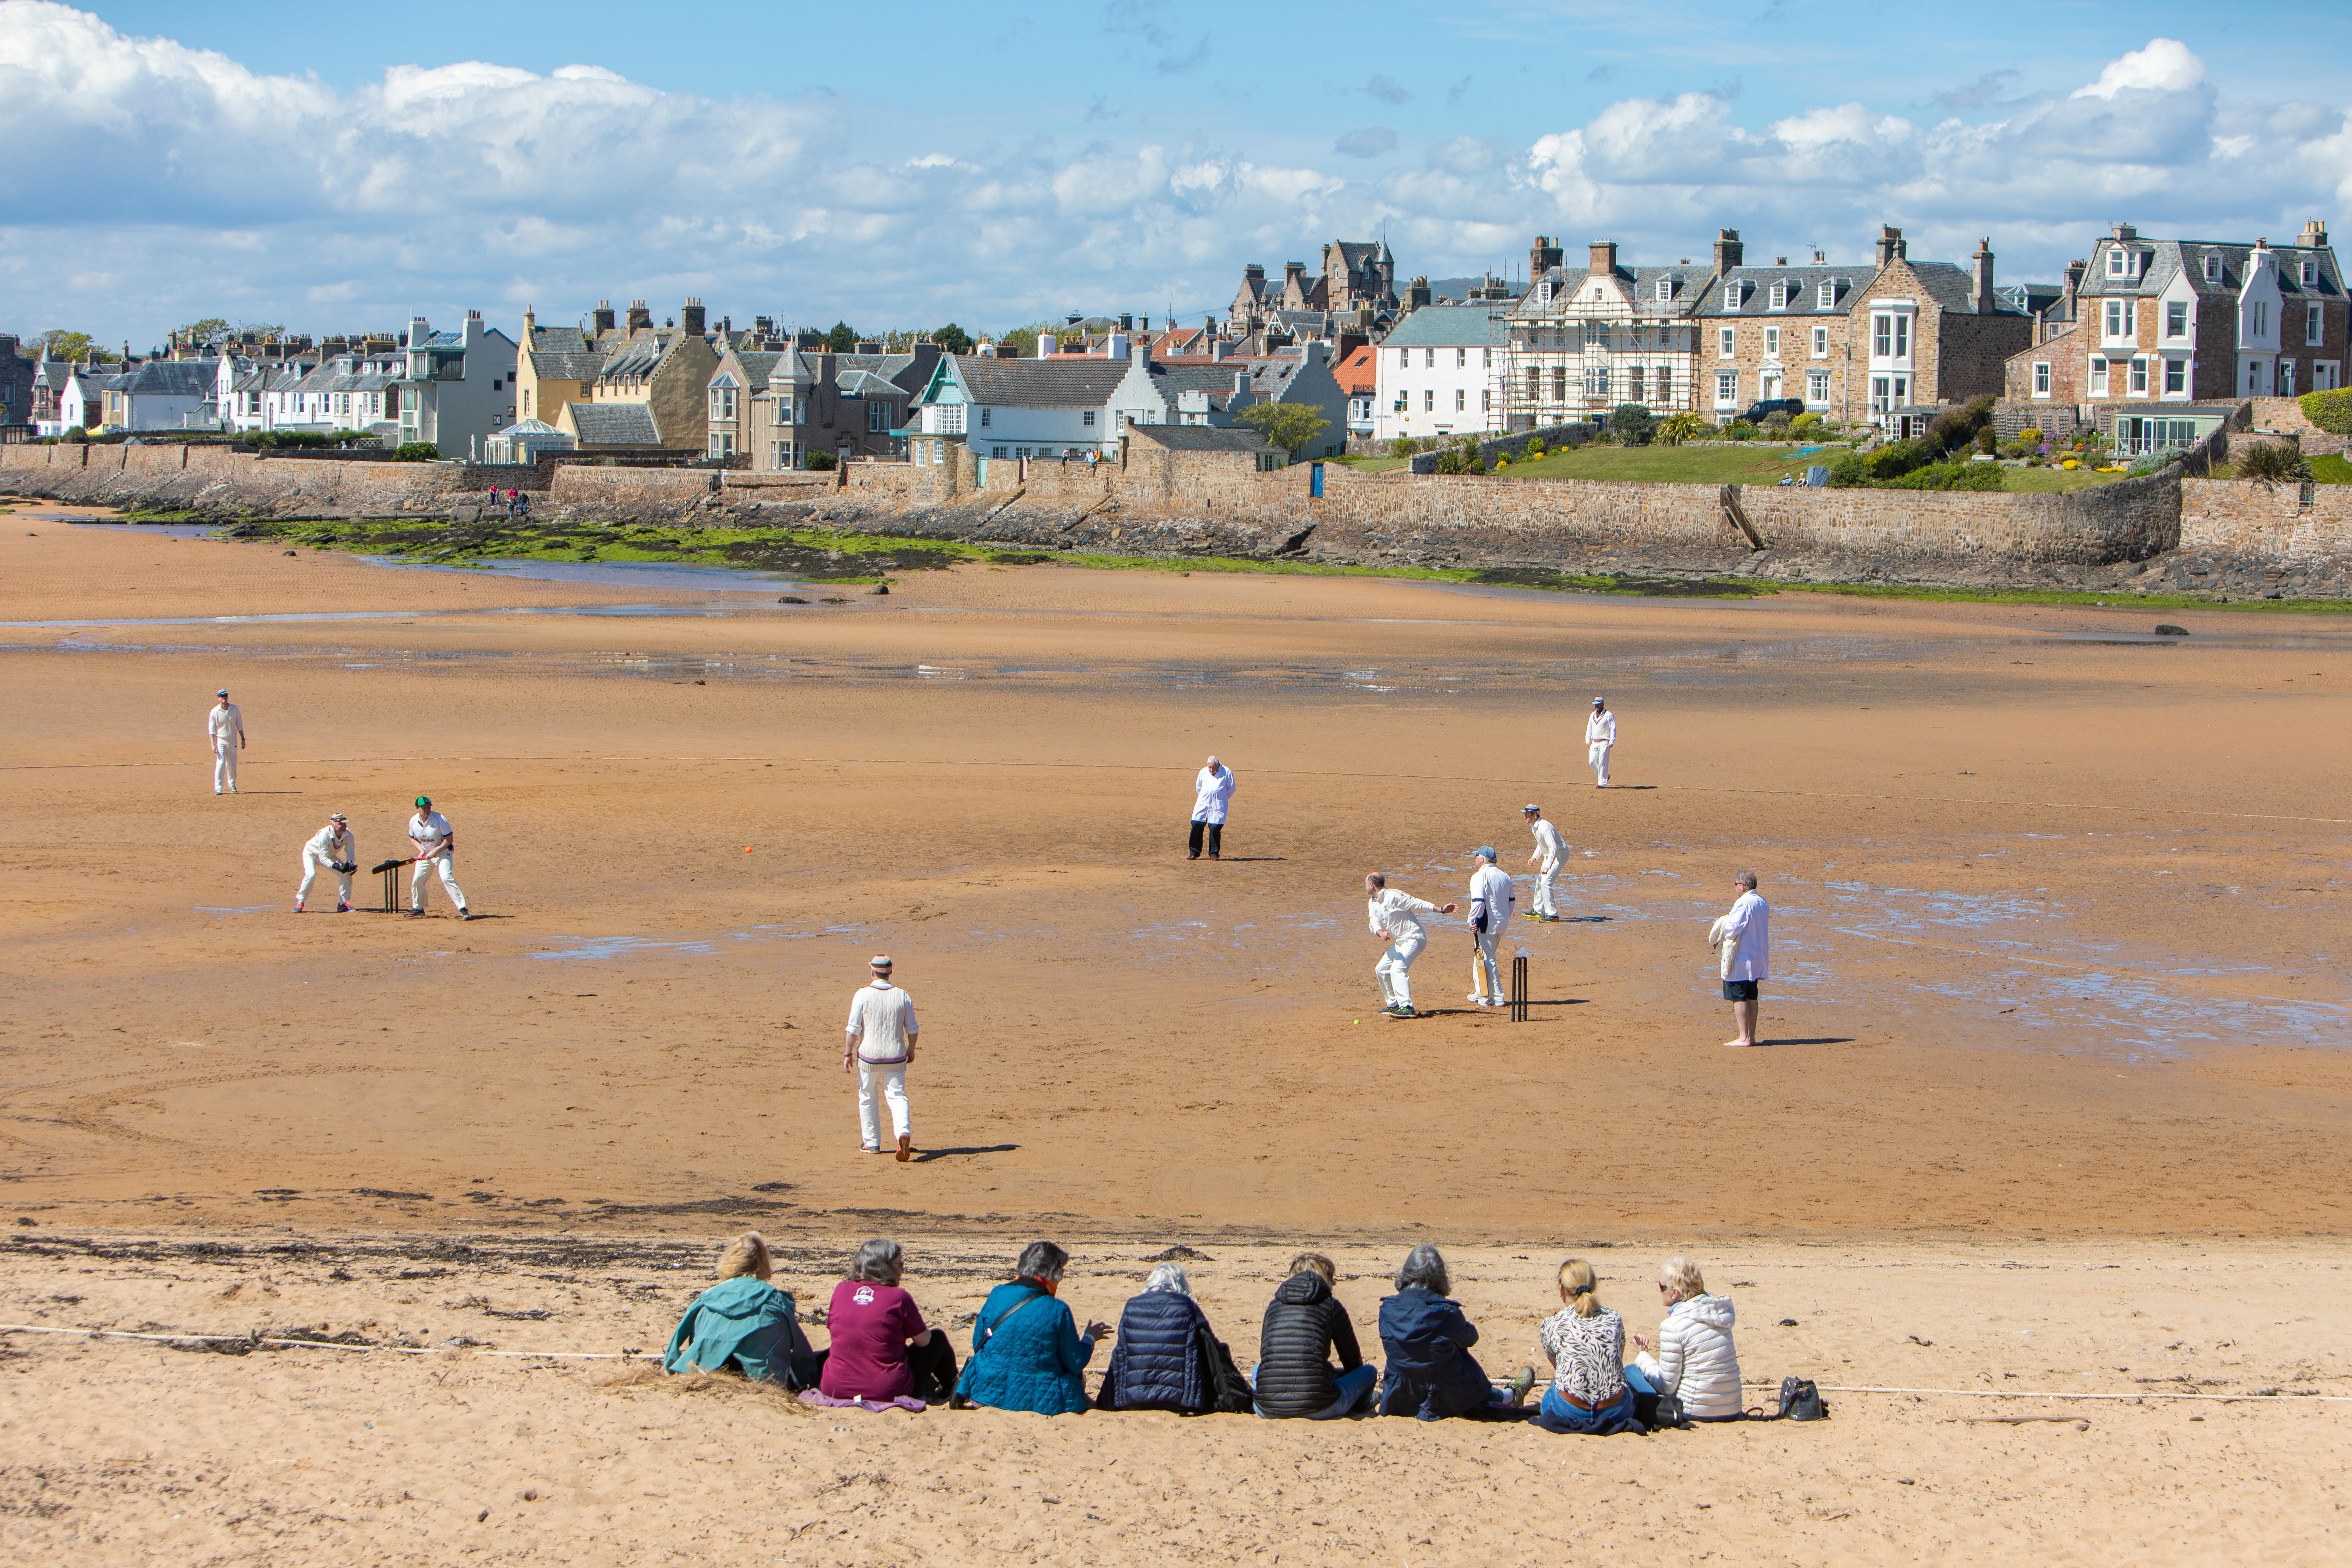 1st Game of Season at Elie for Beach Cricket. The Ship Inn CC Vs The Borderers match as the 1st match of the season begins in Elie.